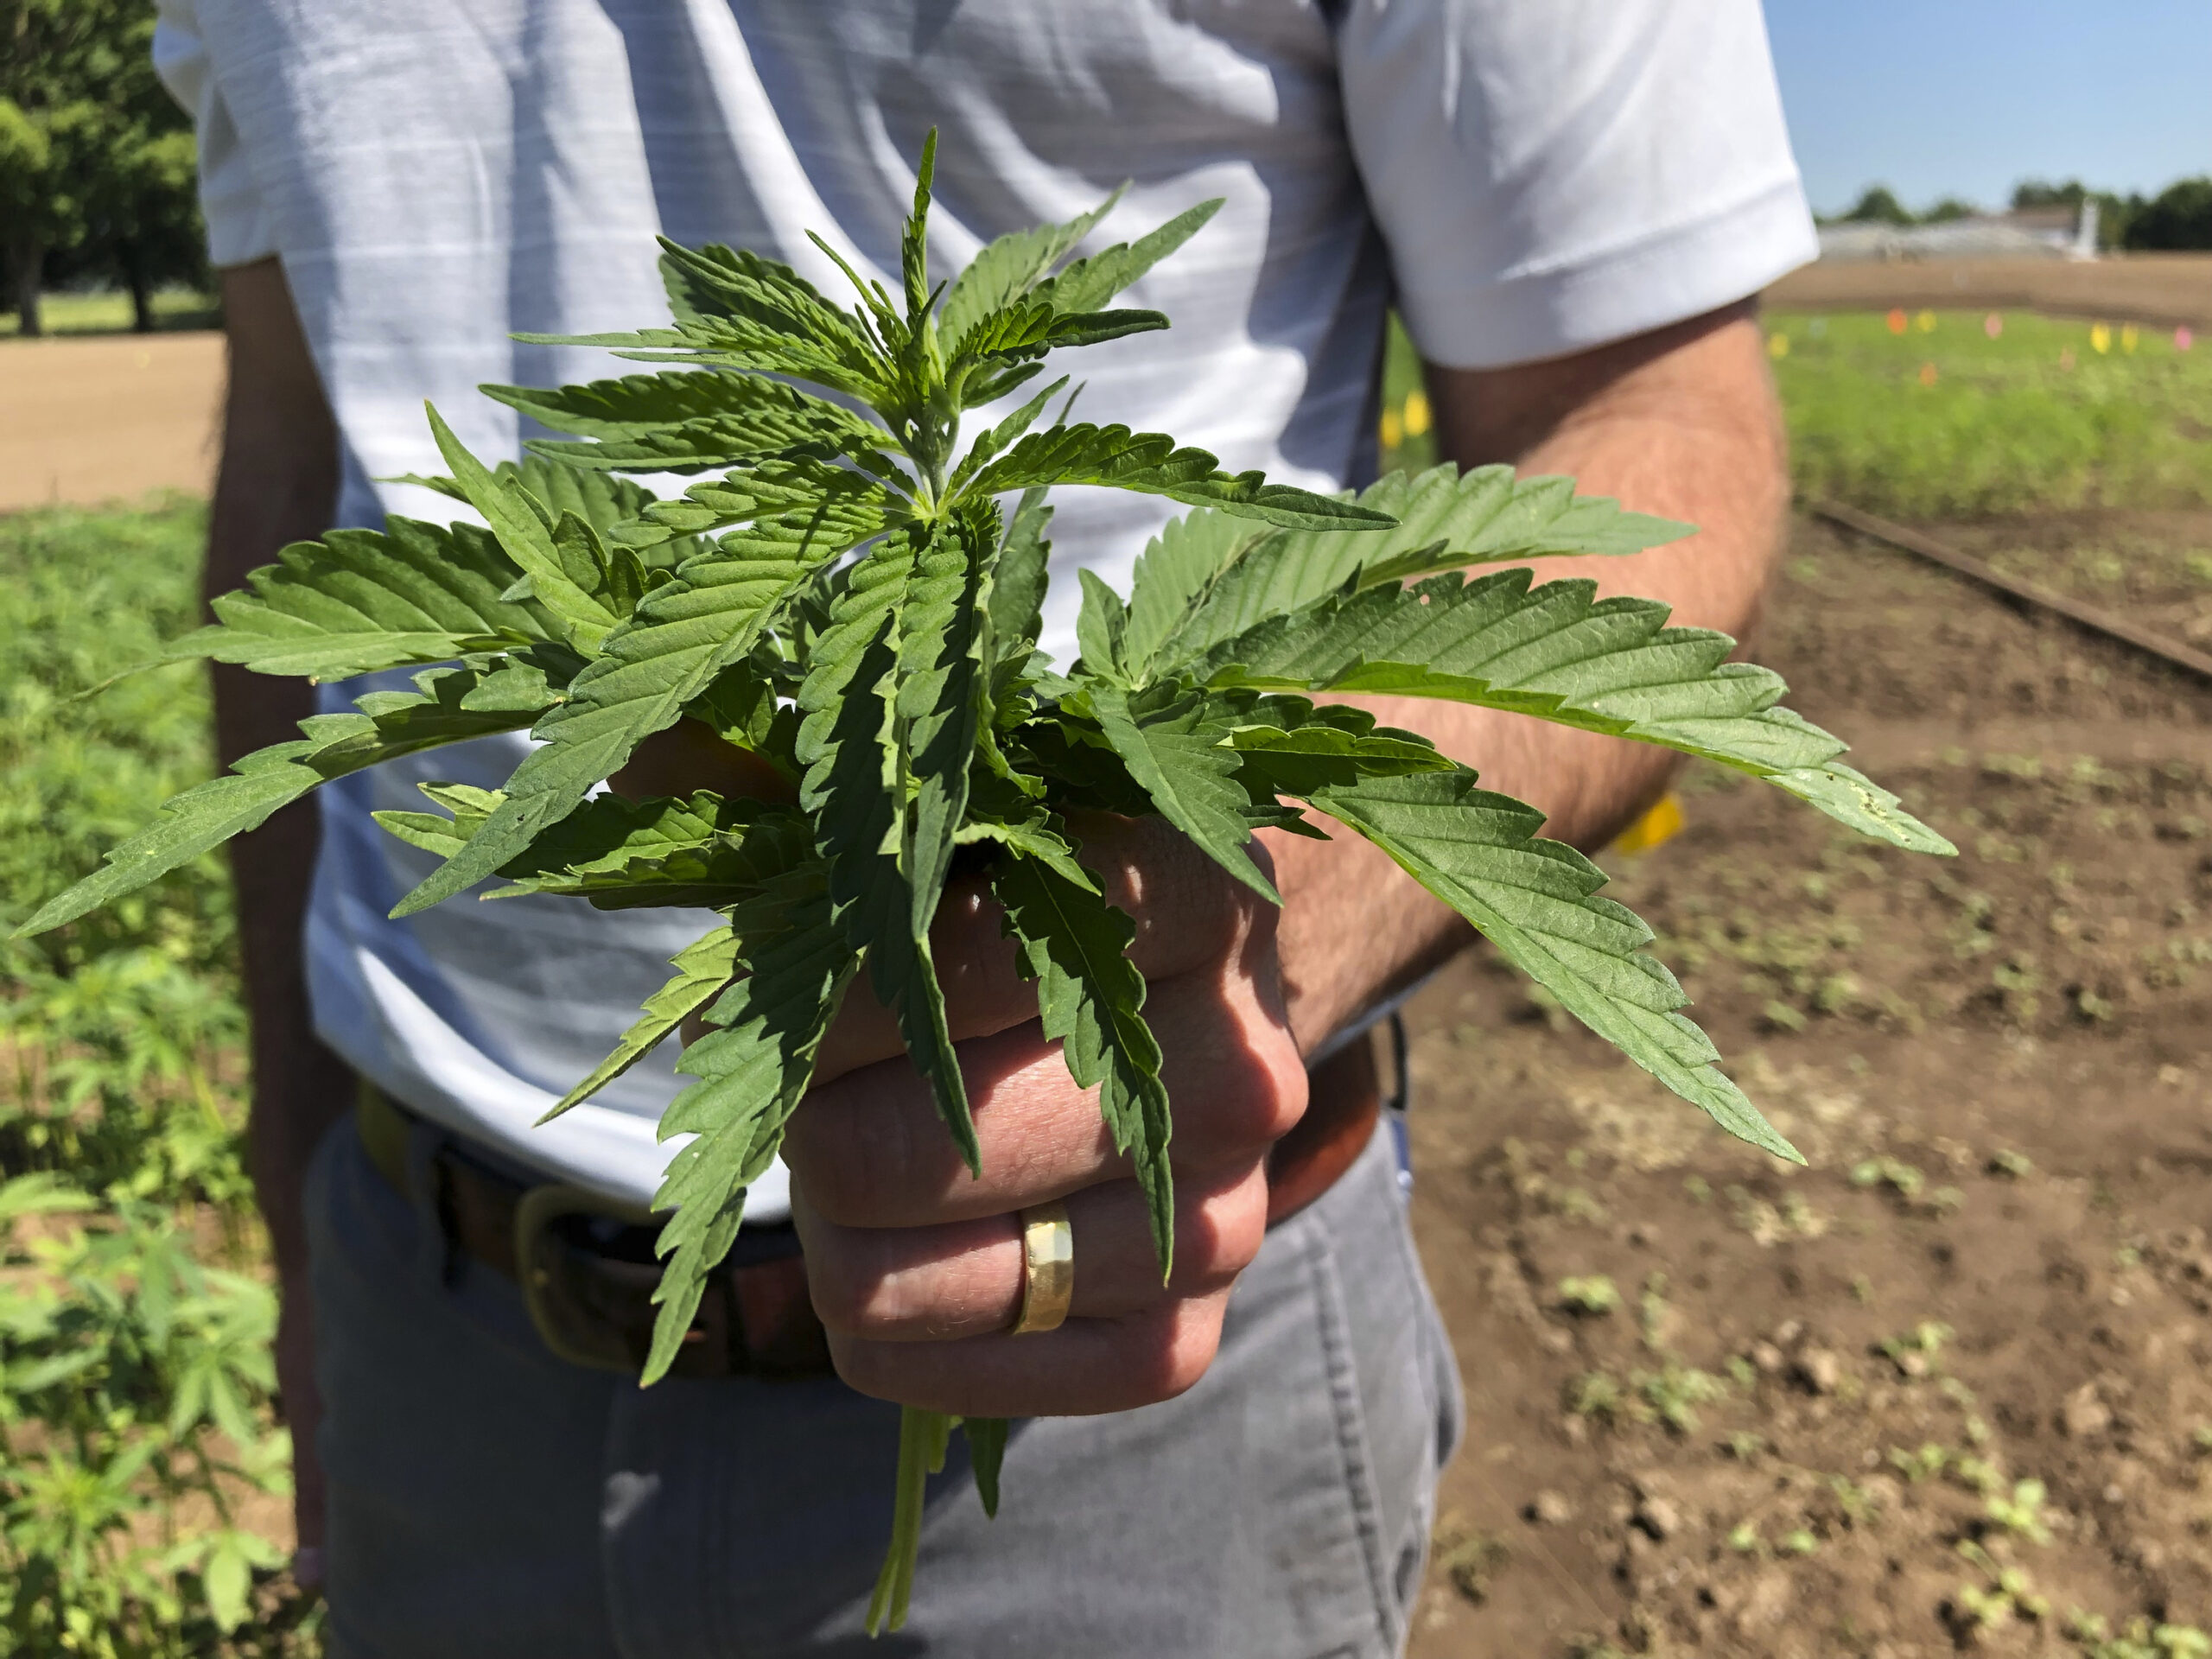 What’s holding back Wisconsin’s hemp industry? A farmer weighs in